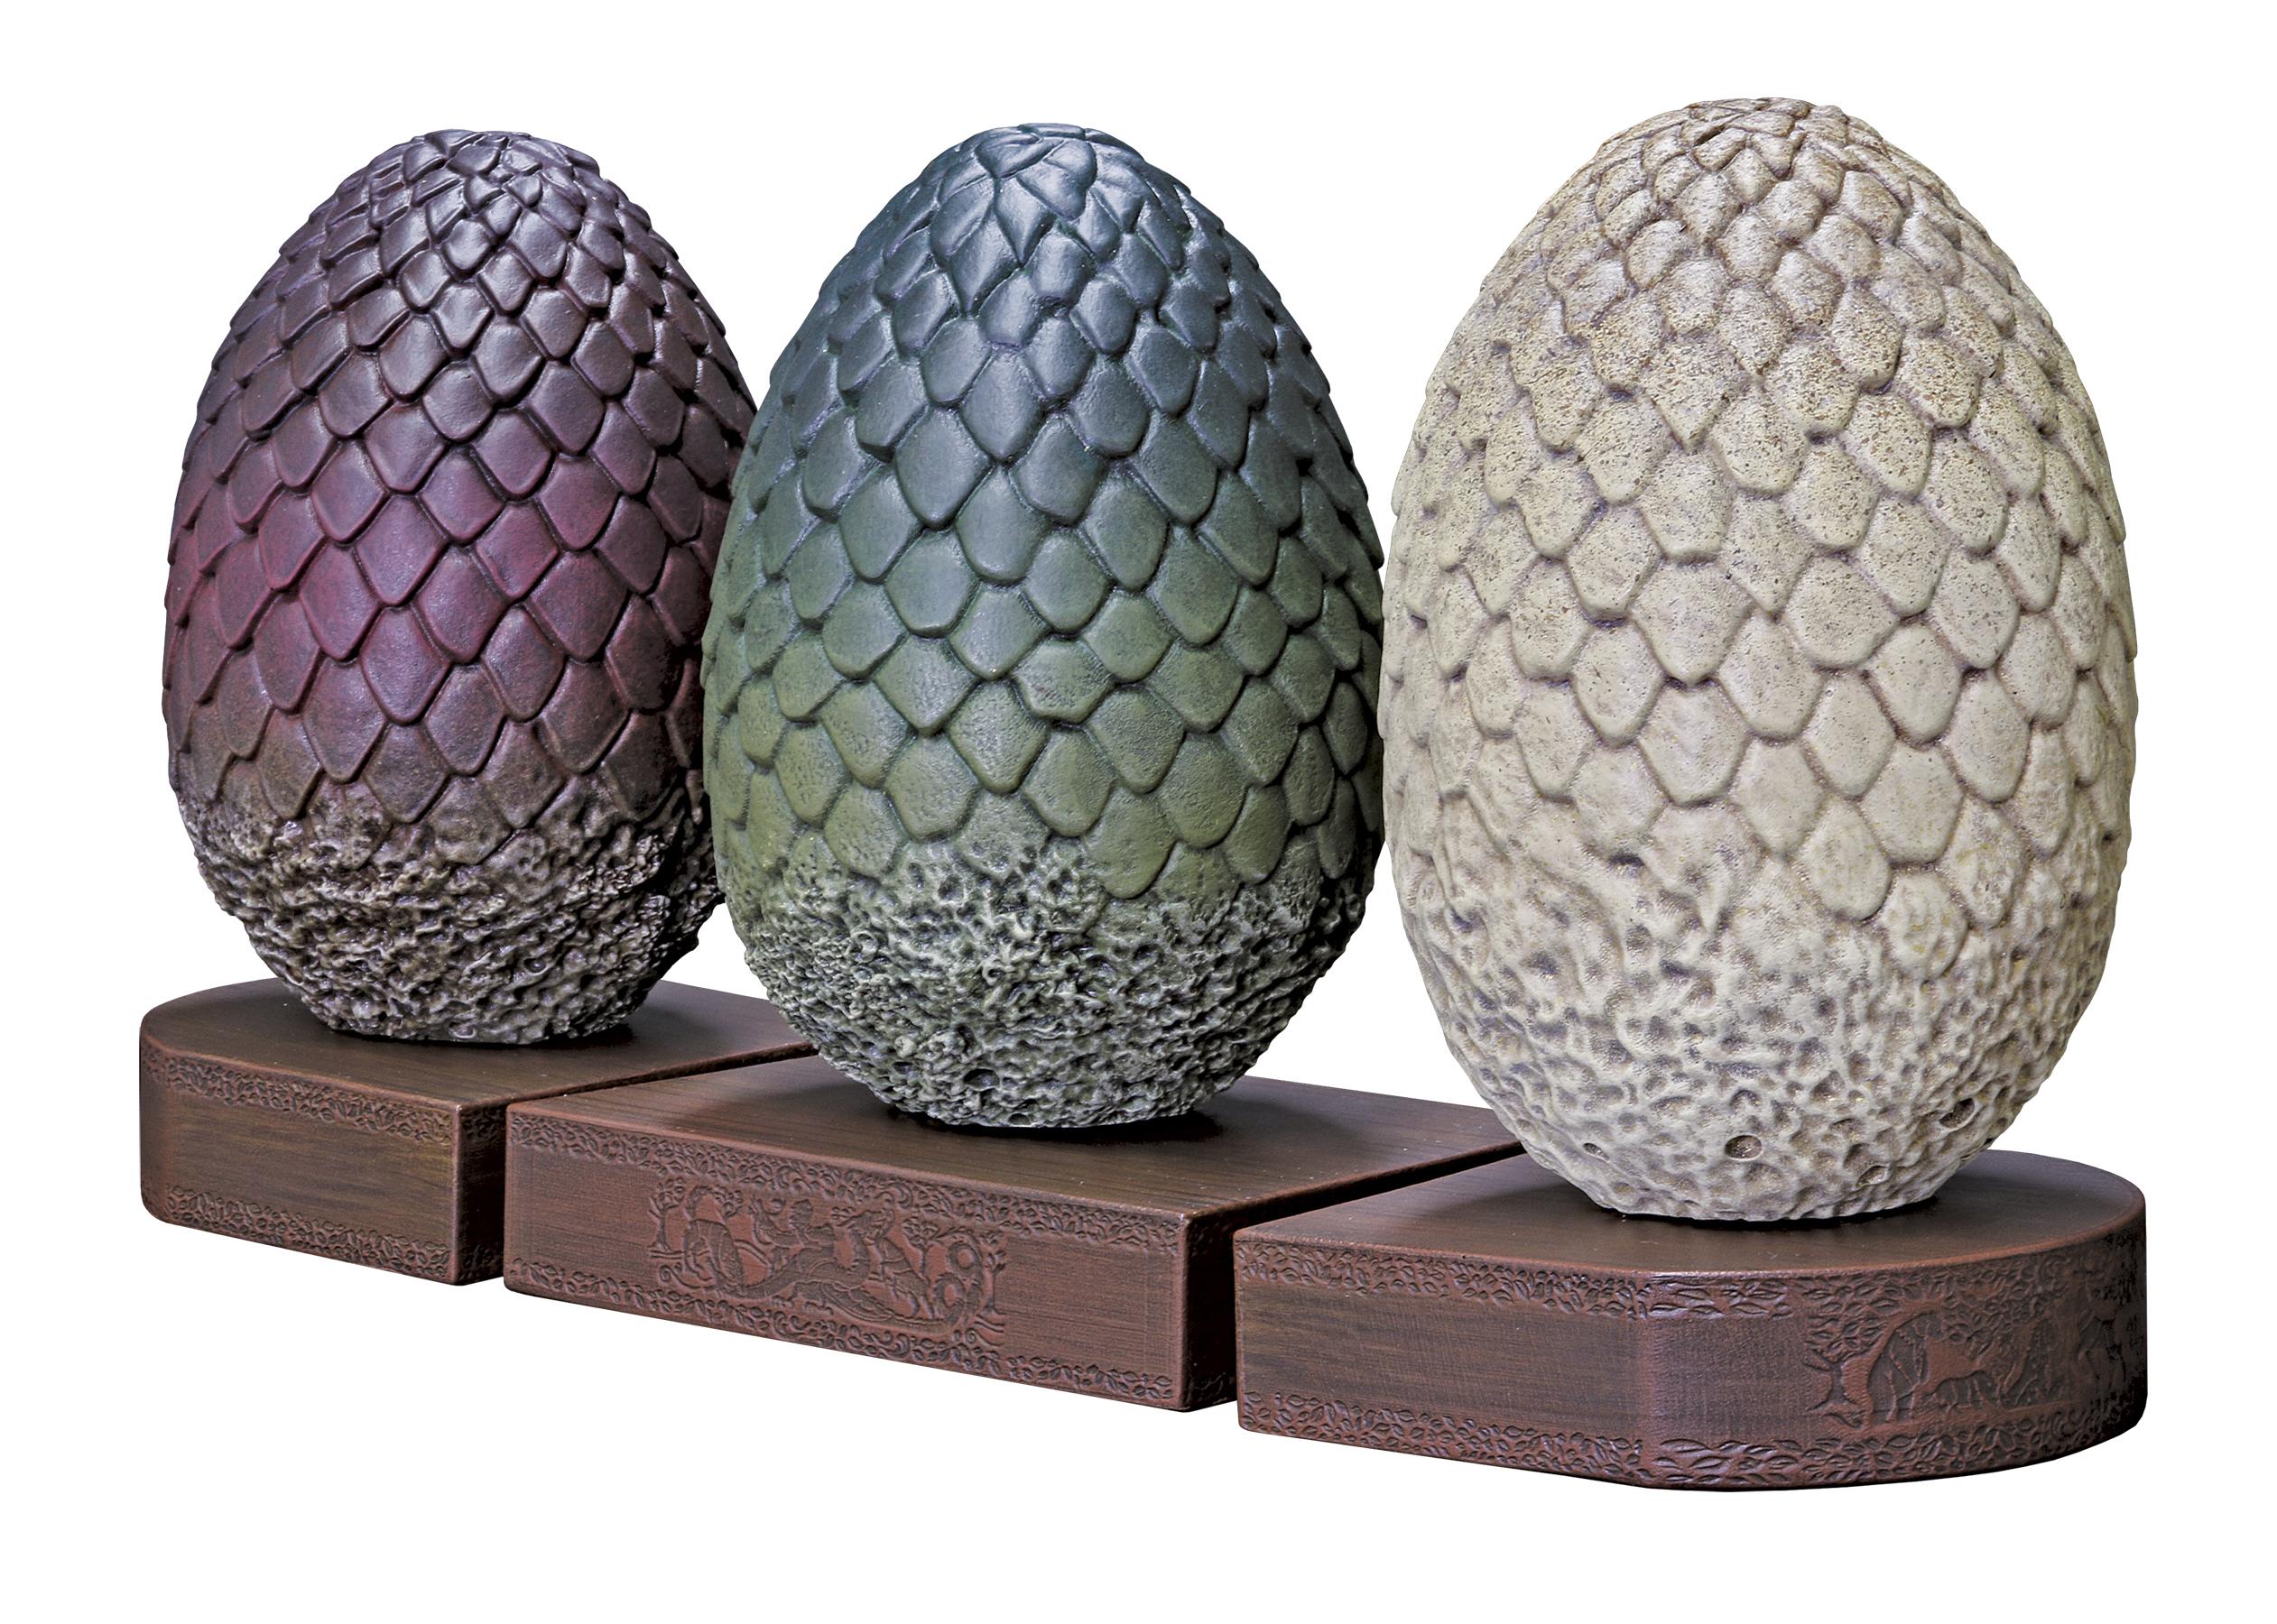 GAME OF THRONES DRAGON EGG BOOKENDS